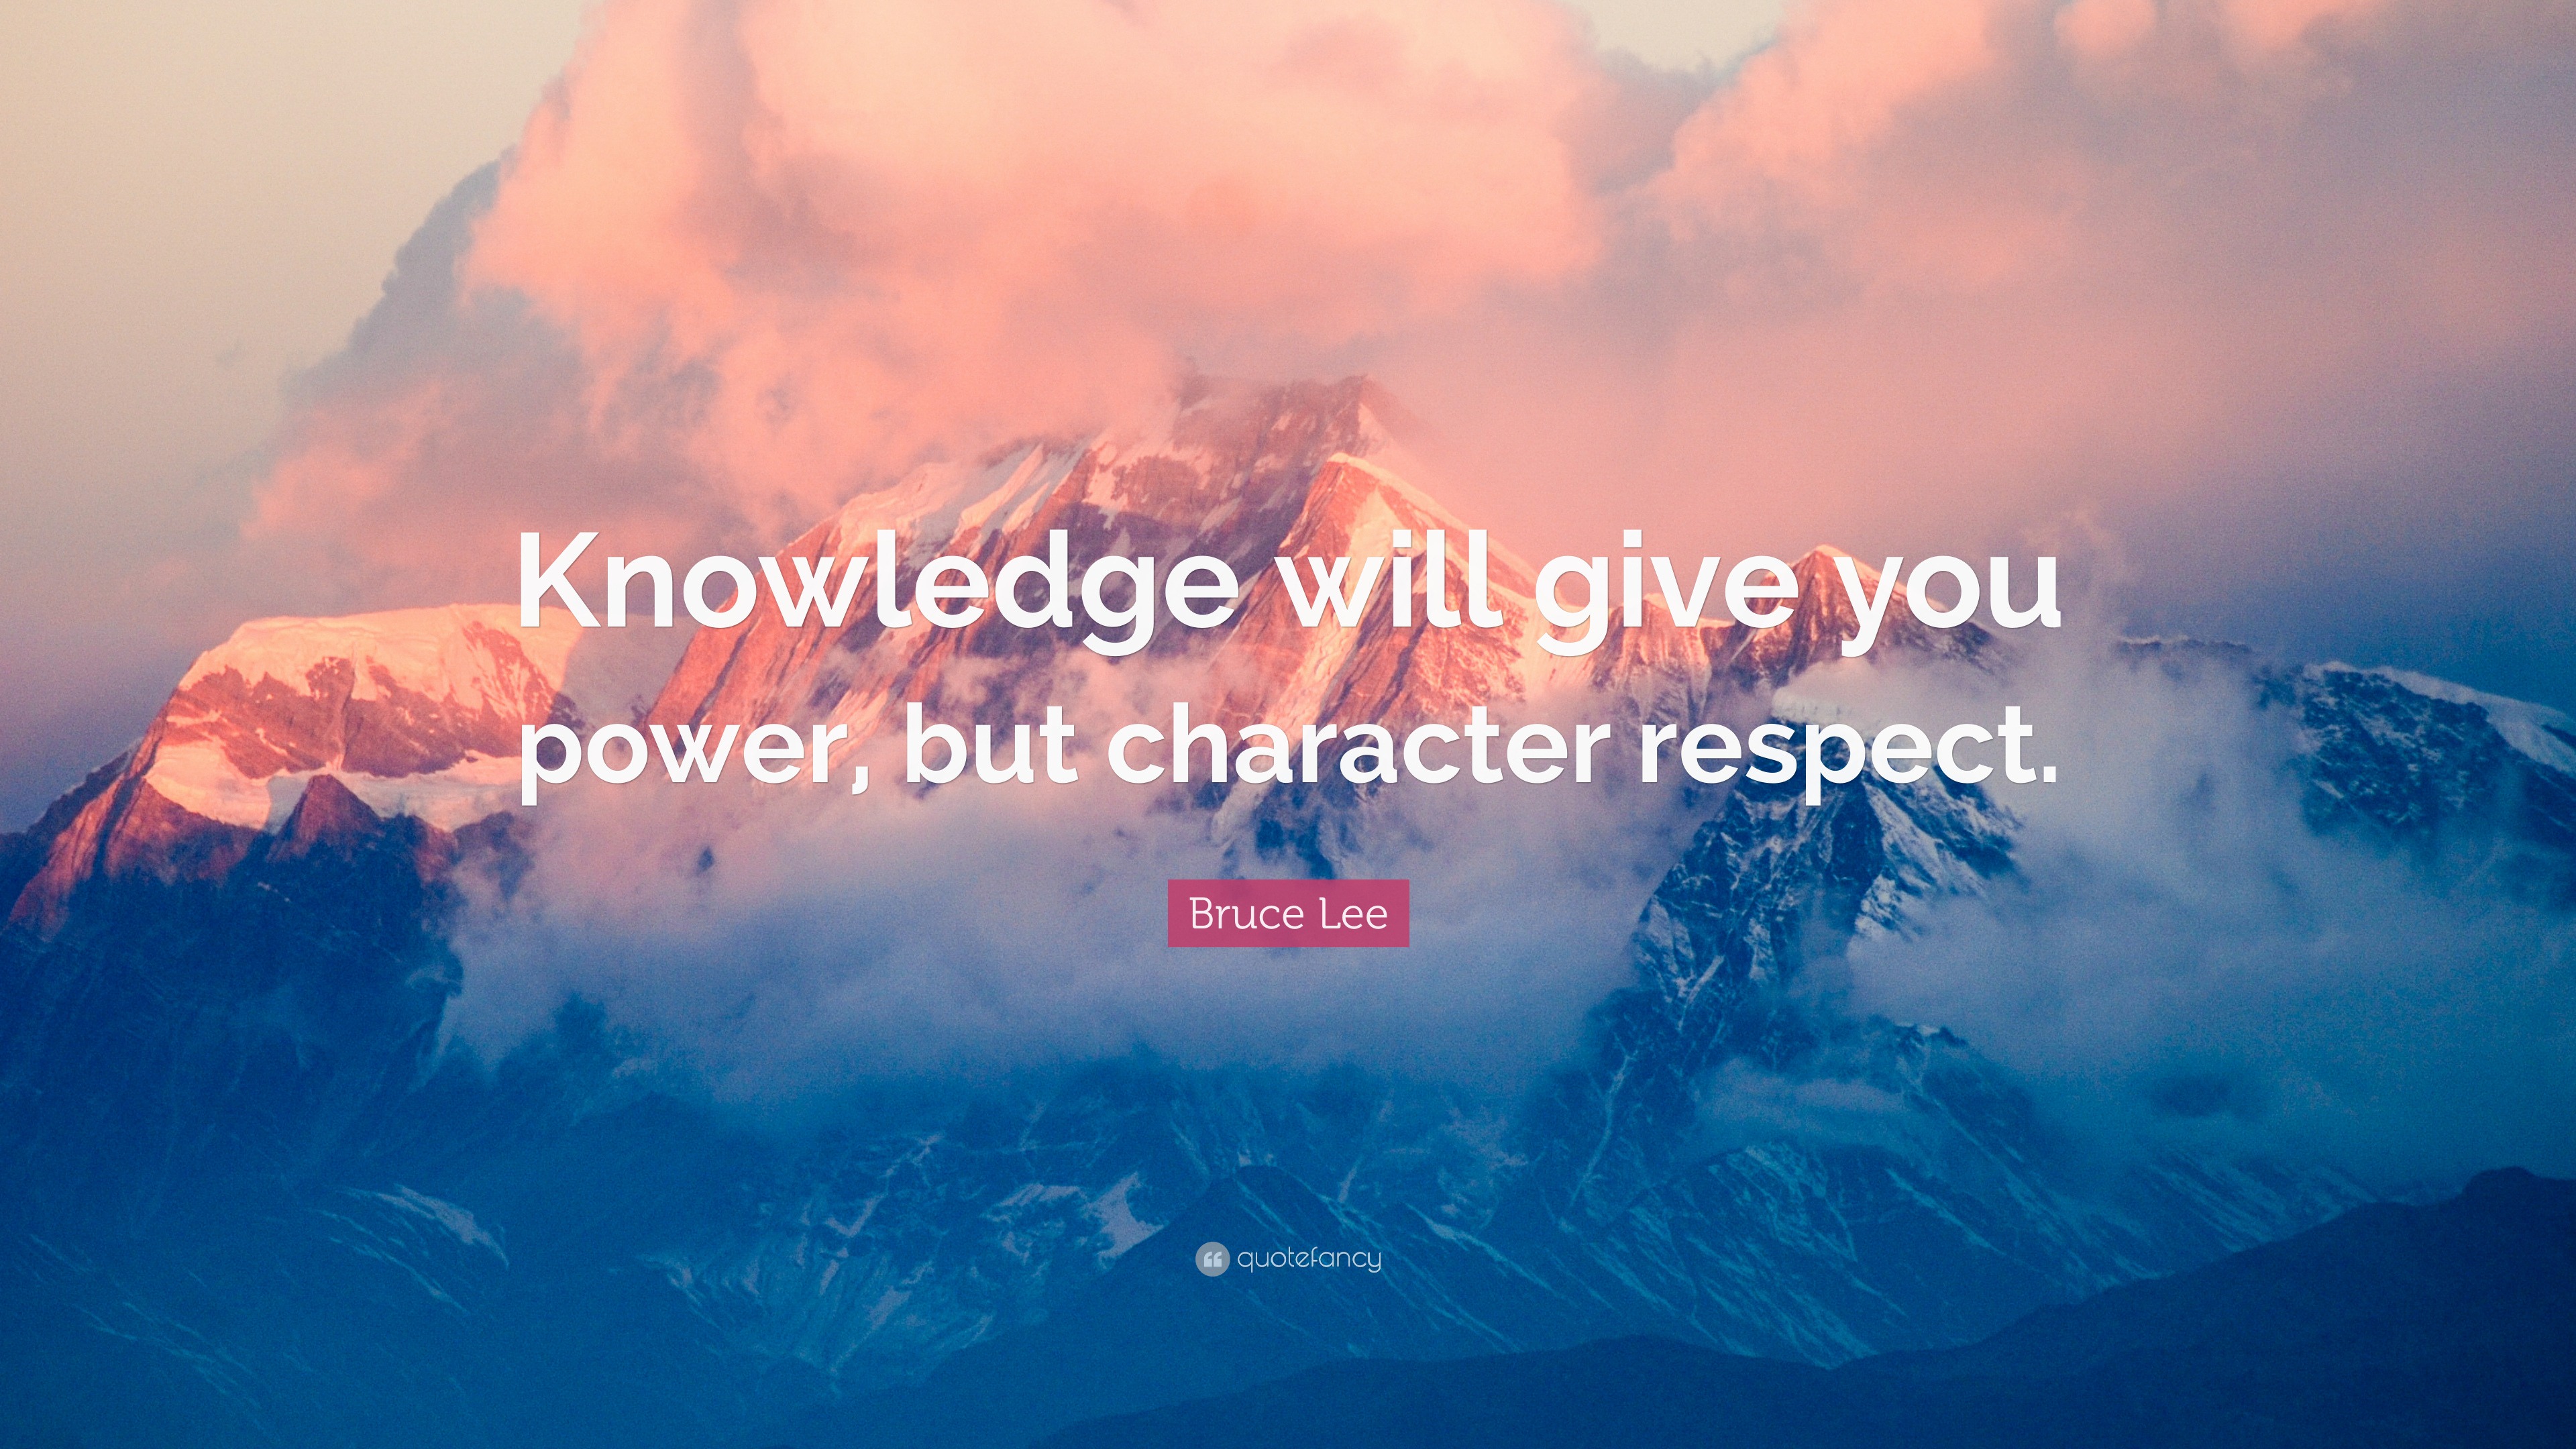 Bruce Lee Quote “Knowledge will give you power, but